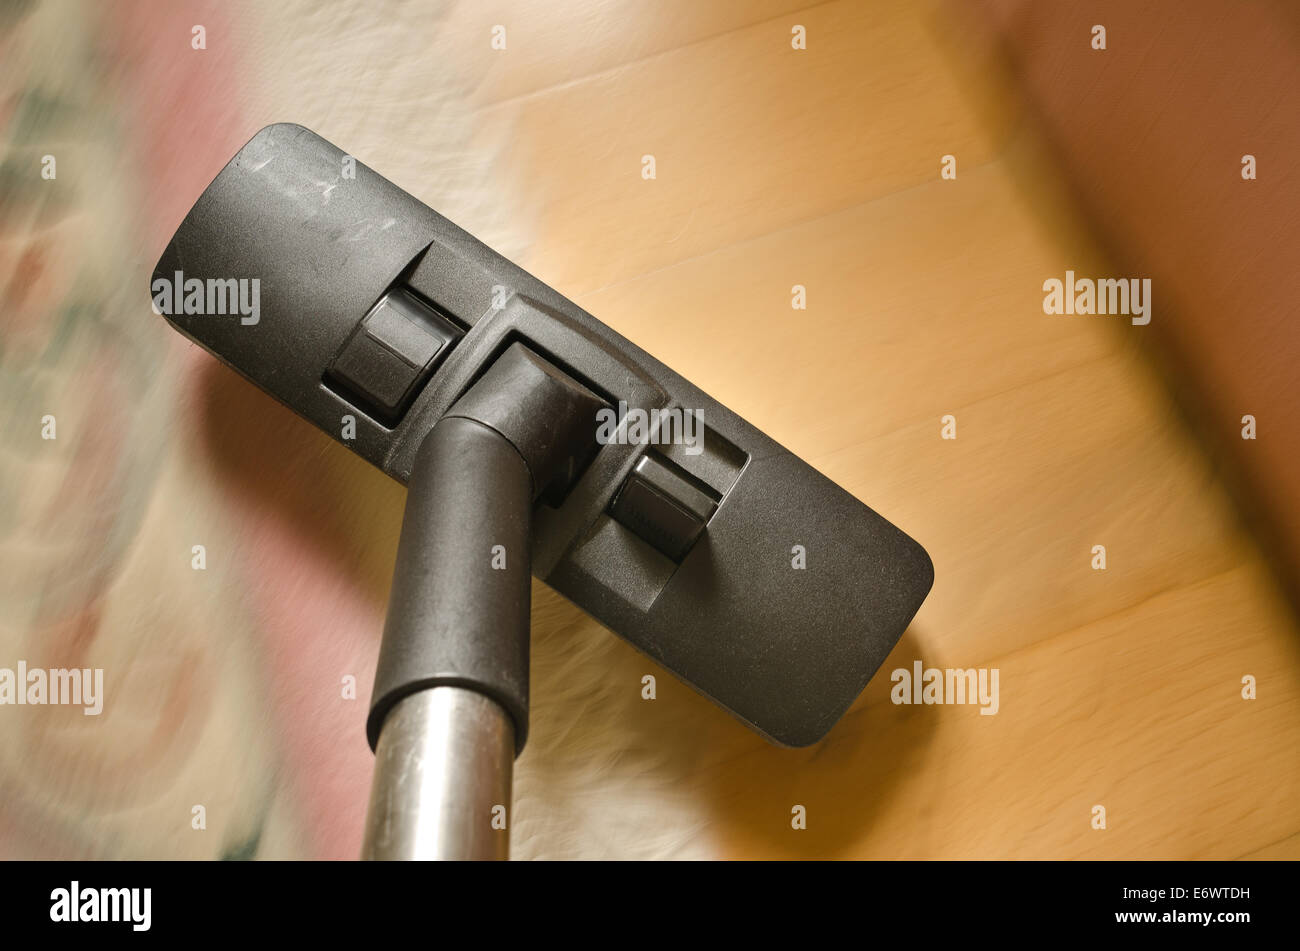 rush action and movement detailed view of hover nozzle being swept over carpets tiles wooden floor cleaning up dirt and dust Stock Photo